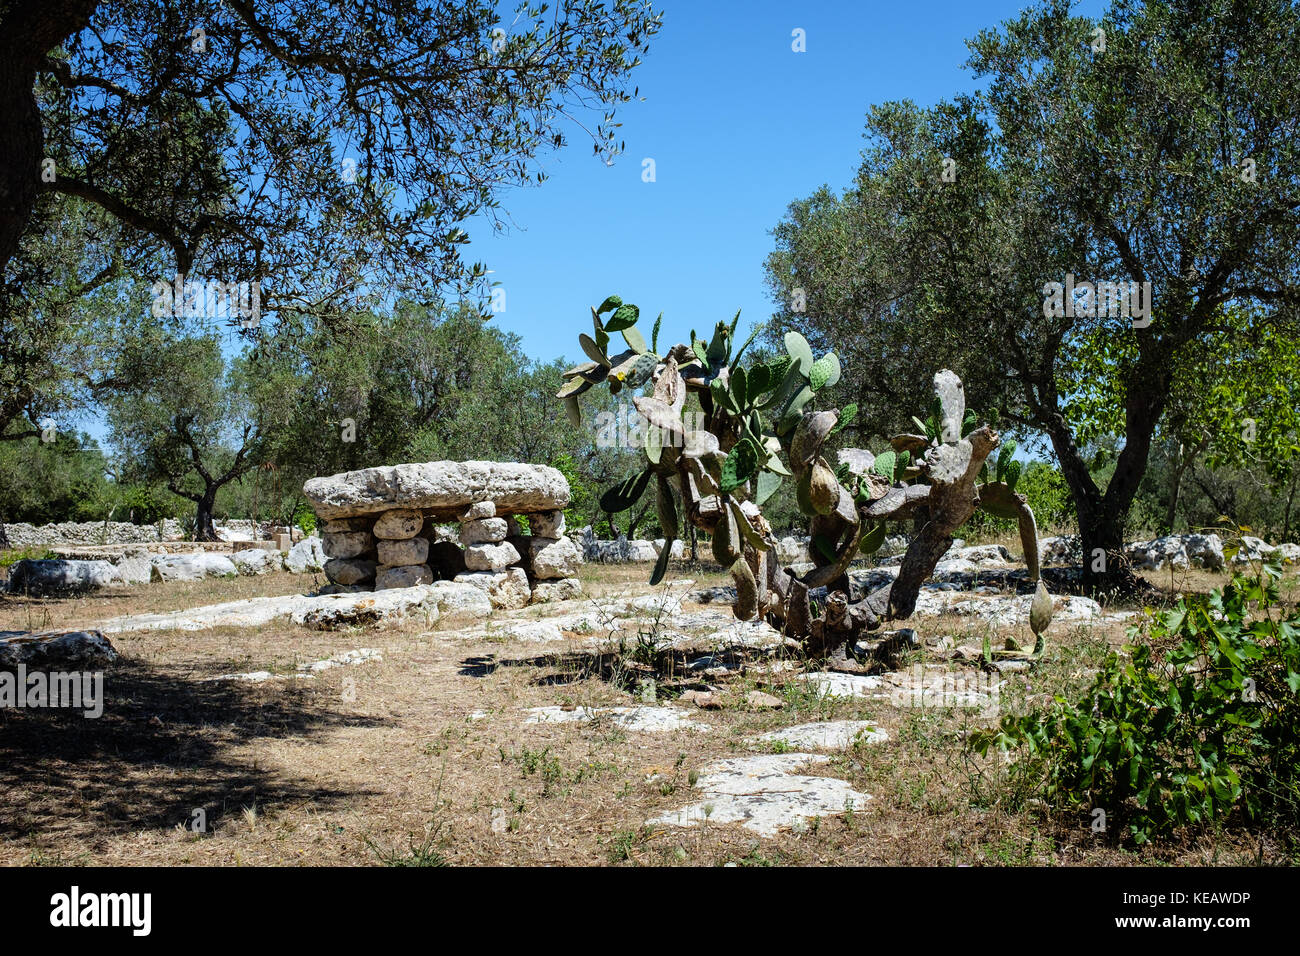 Dolmen in the Apulian countryside Stock Photo